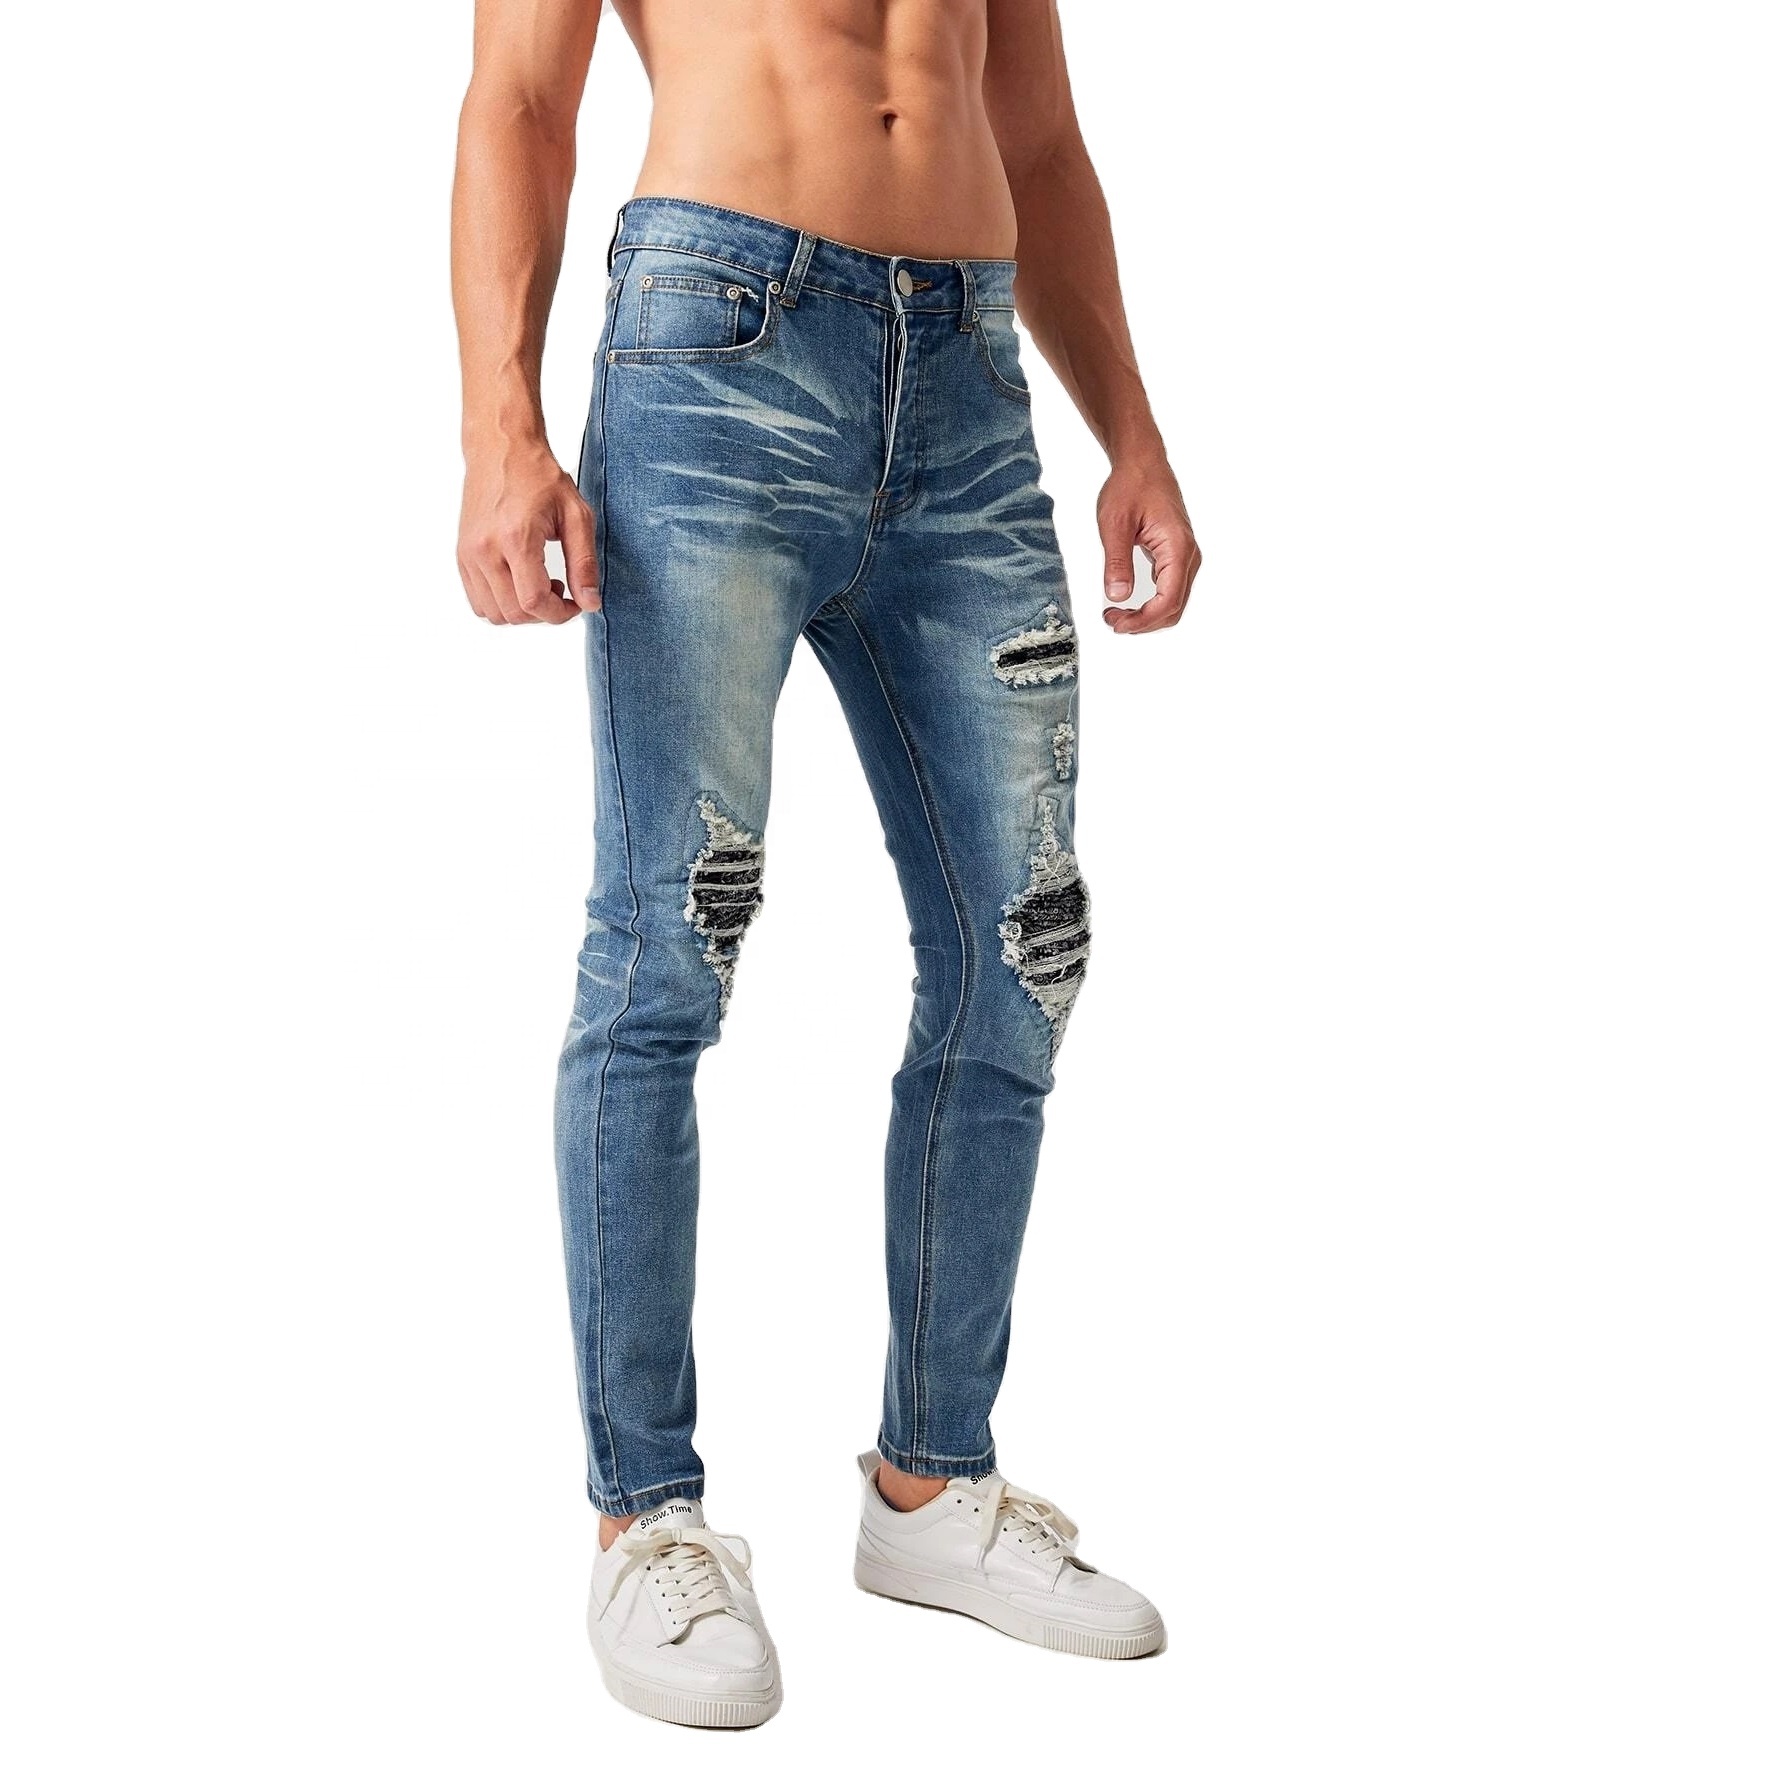 2020 classic fashion fall jeans streetwear motorcycle jeans for men